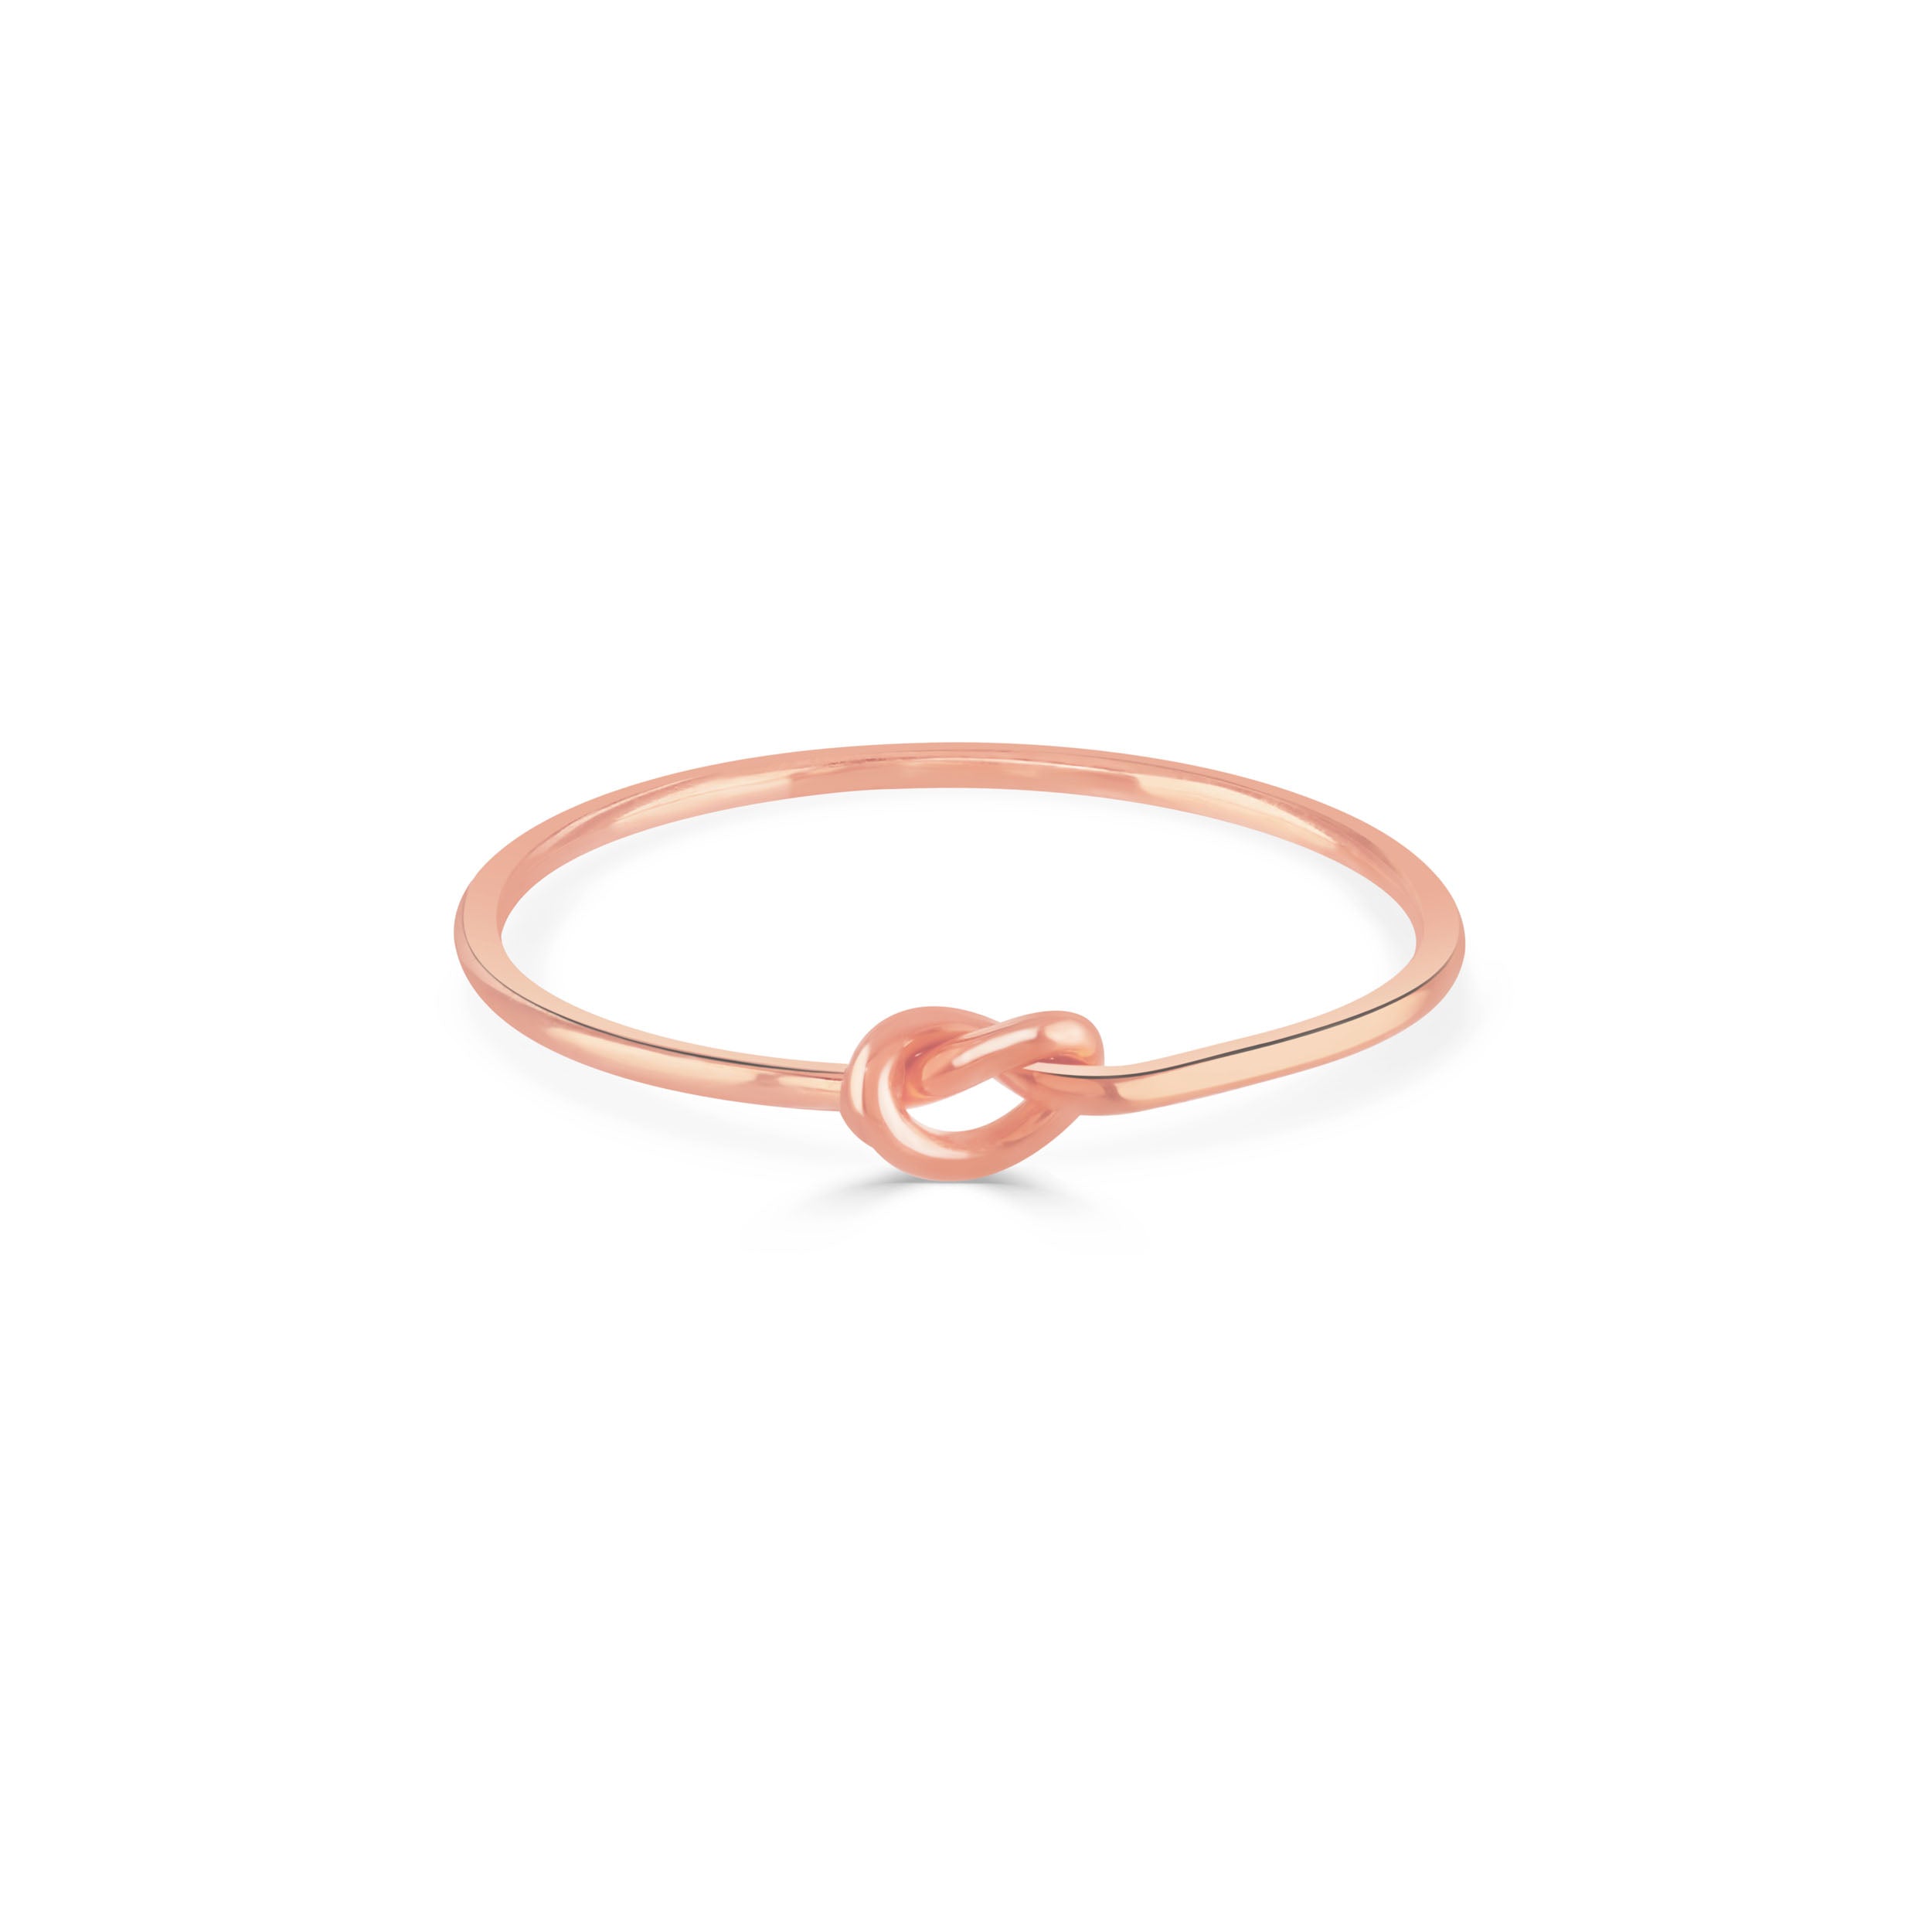  Rose Gold Knot Ring